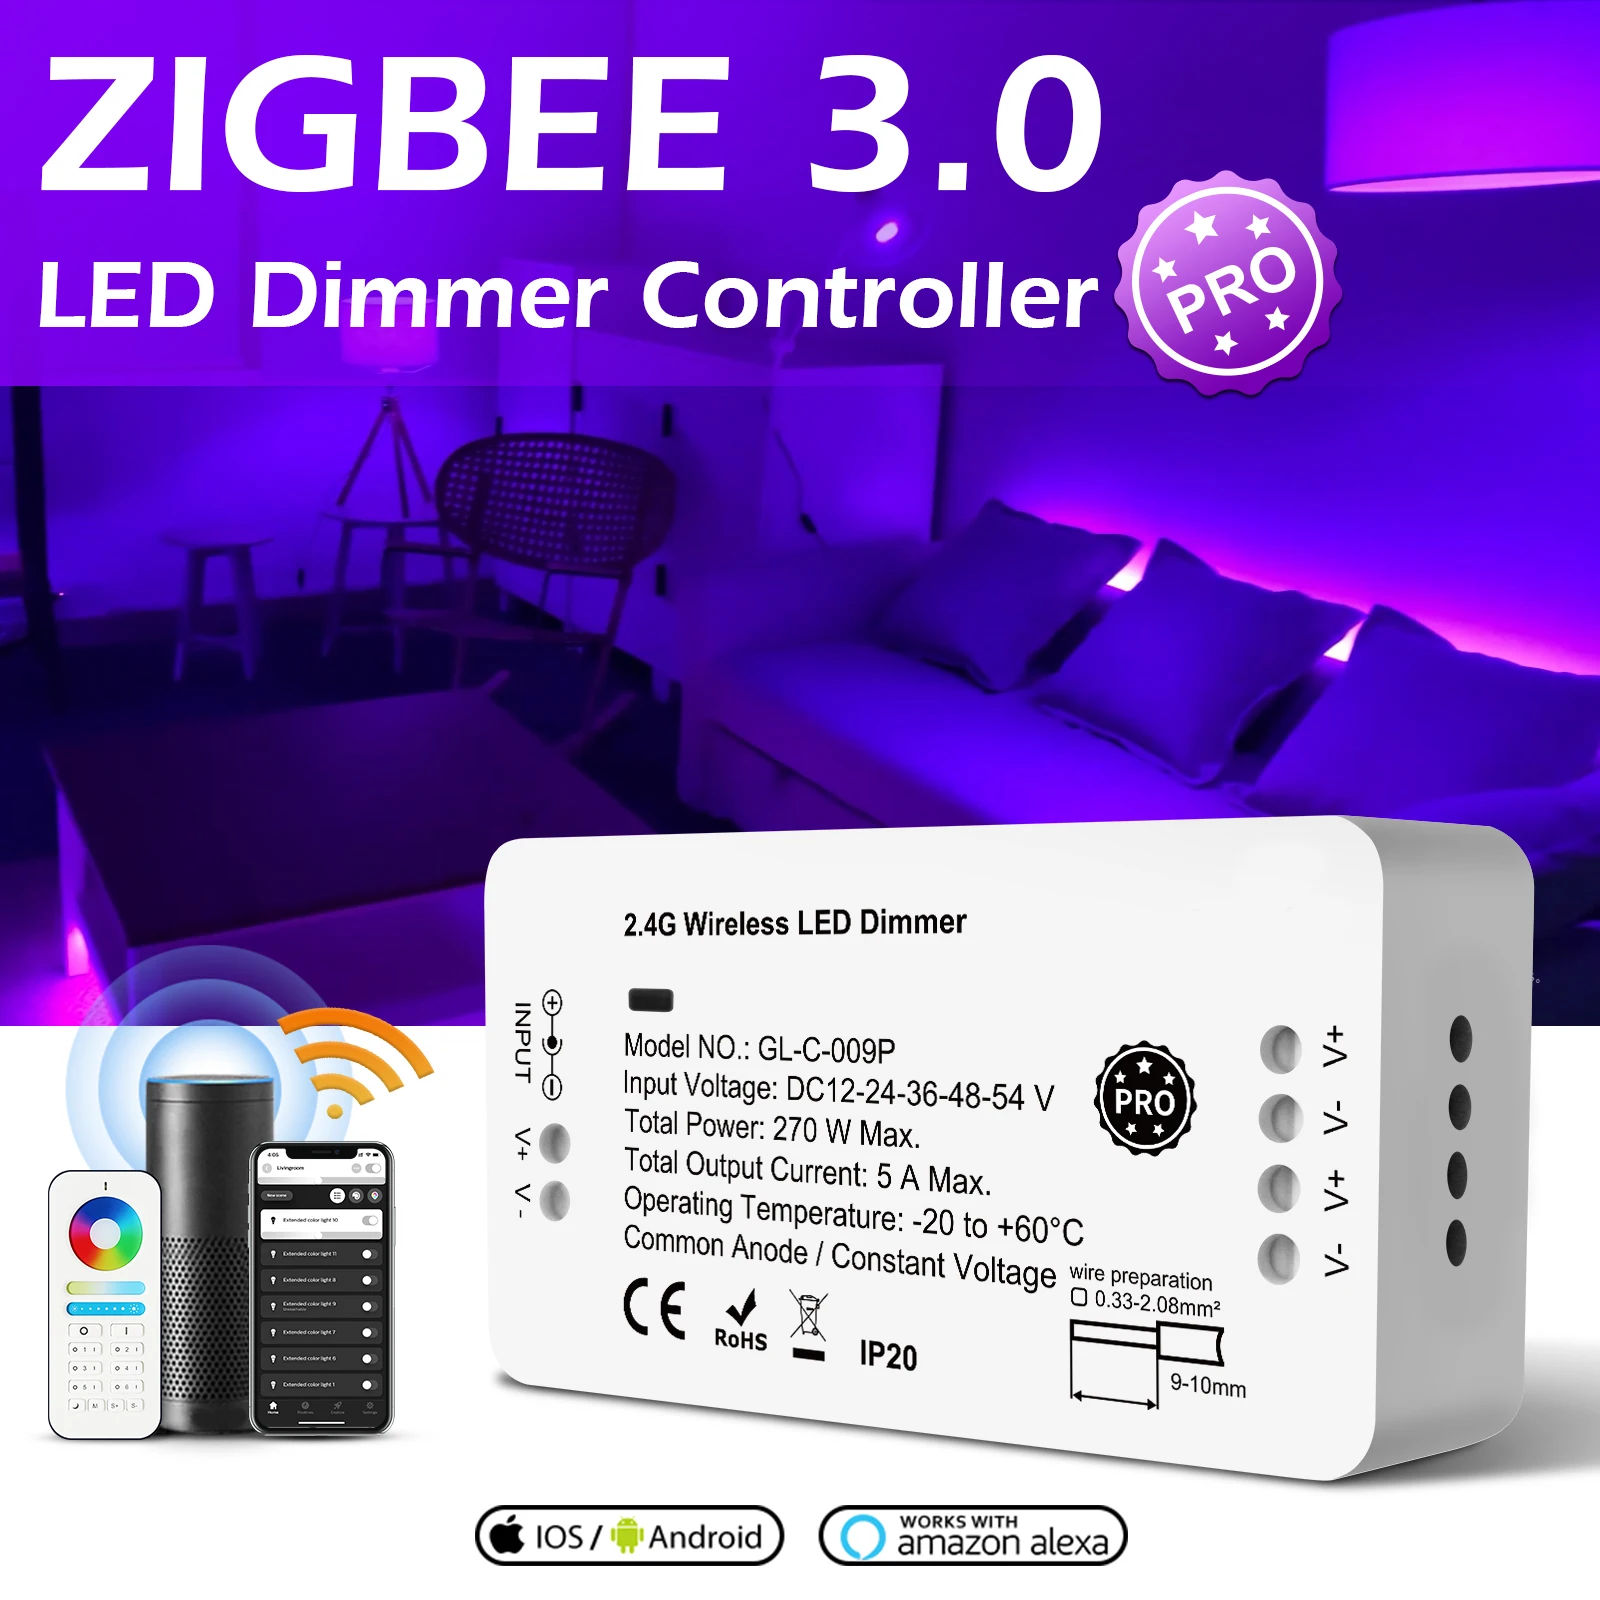 Zigbee 3.0 DC12-24V Smart Pro Dimmer LED ZigBee Strip Controller work with RF Remote, for LED Strip